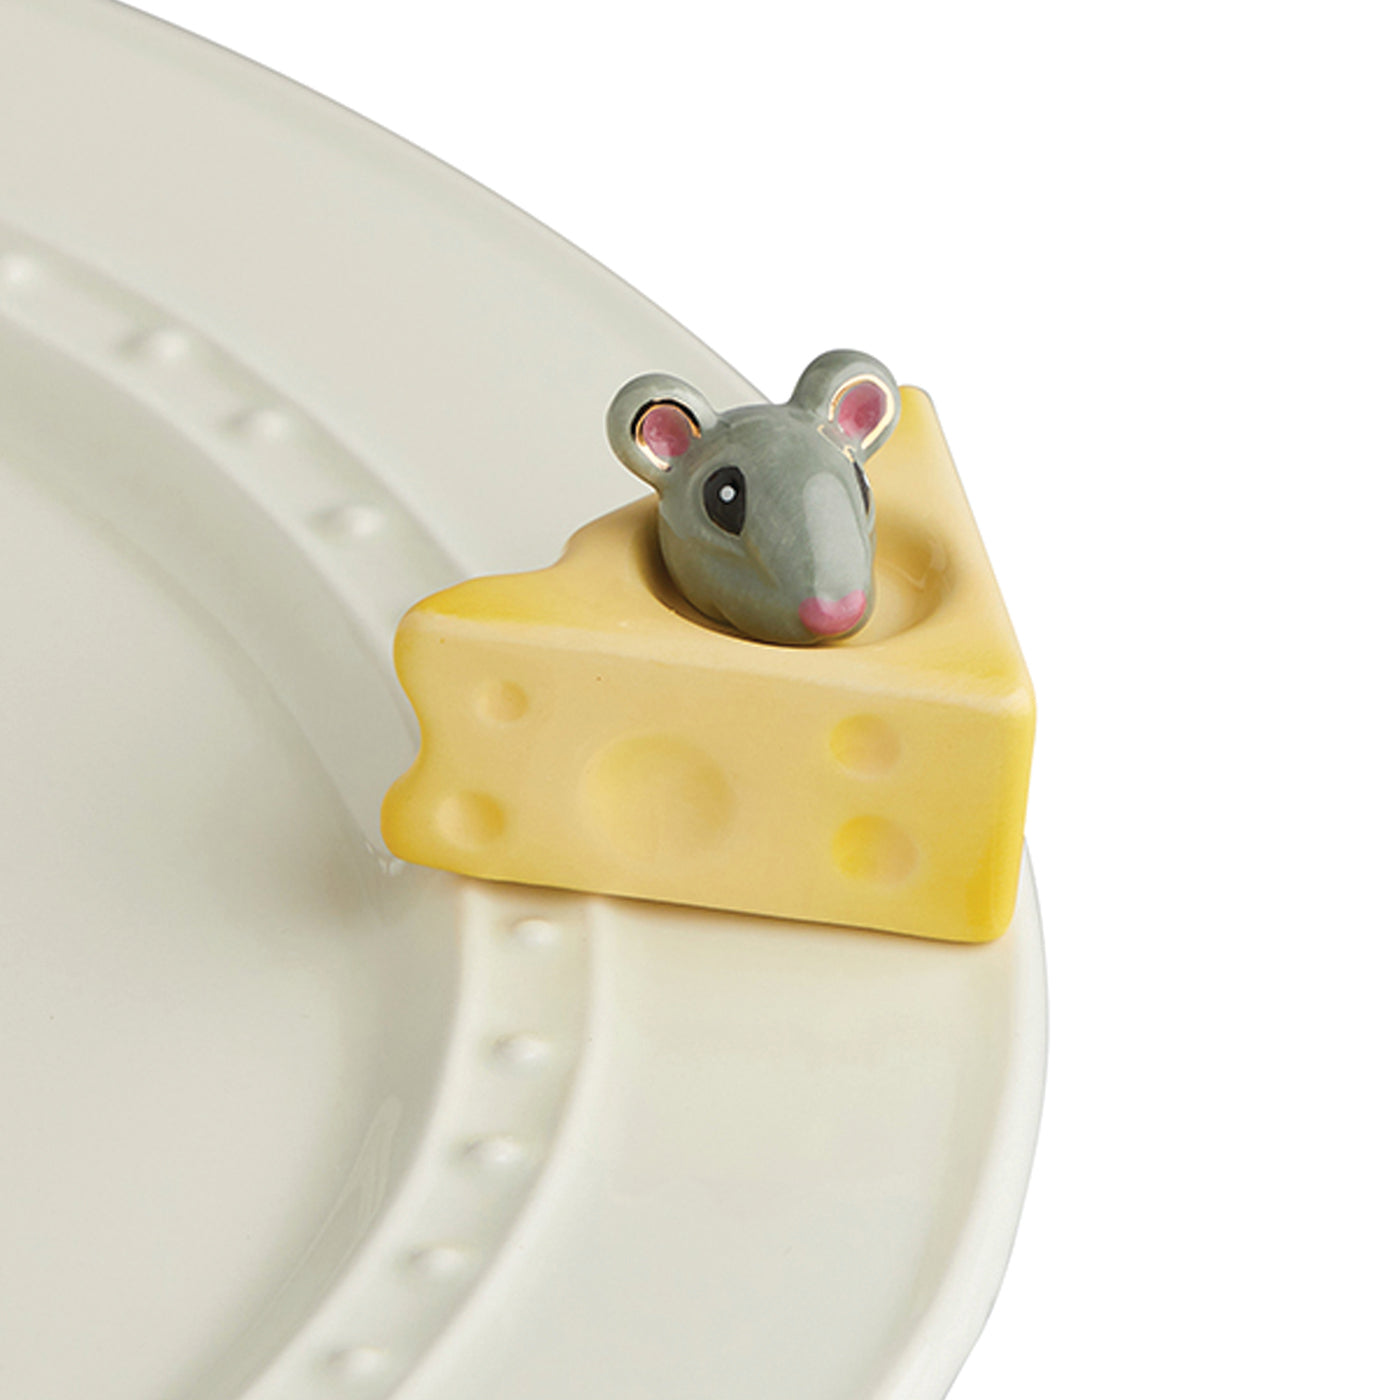 Nora Fleming “Nora Fleming Minis” mini figure ceramic minis gift present "cheese, please!" cheese mouse cute animal animals food kitchen